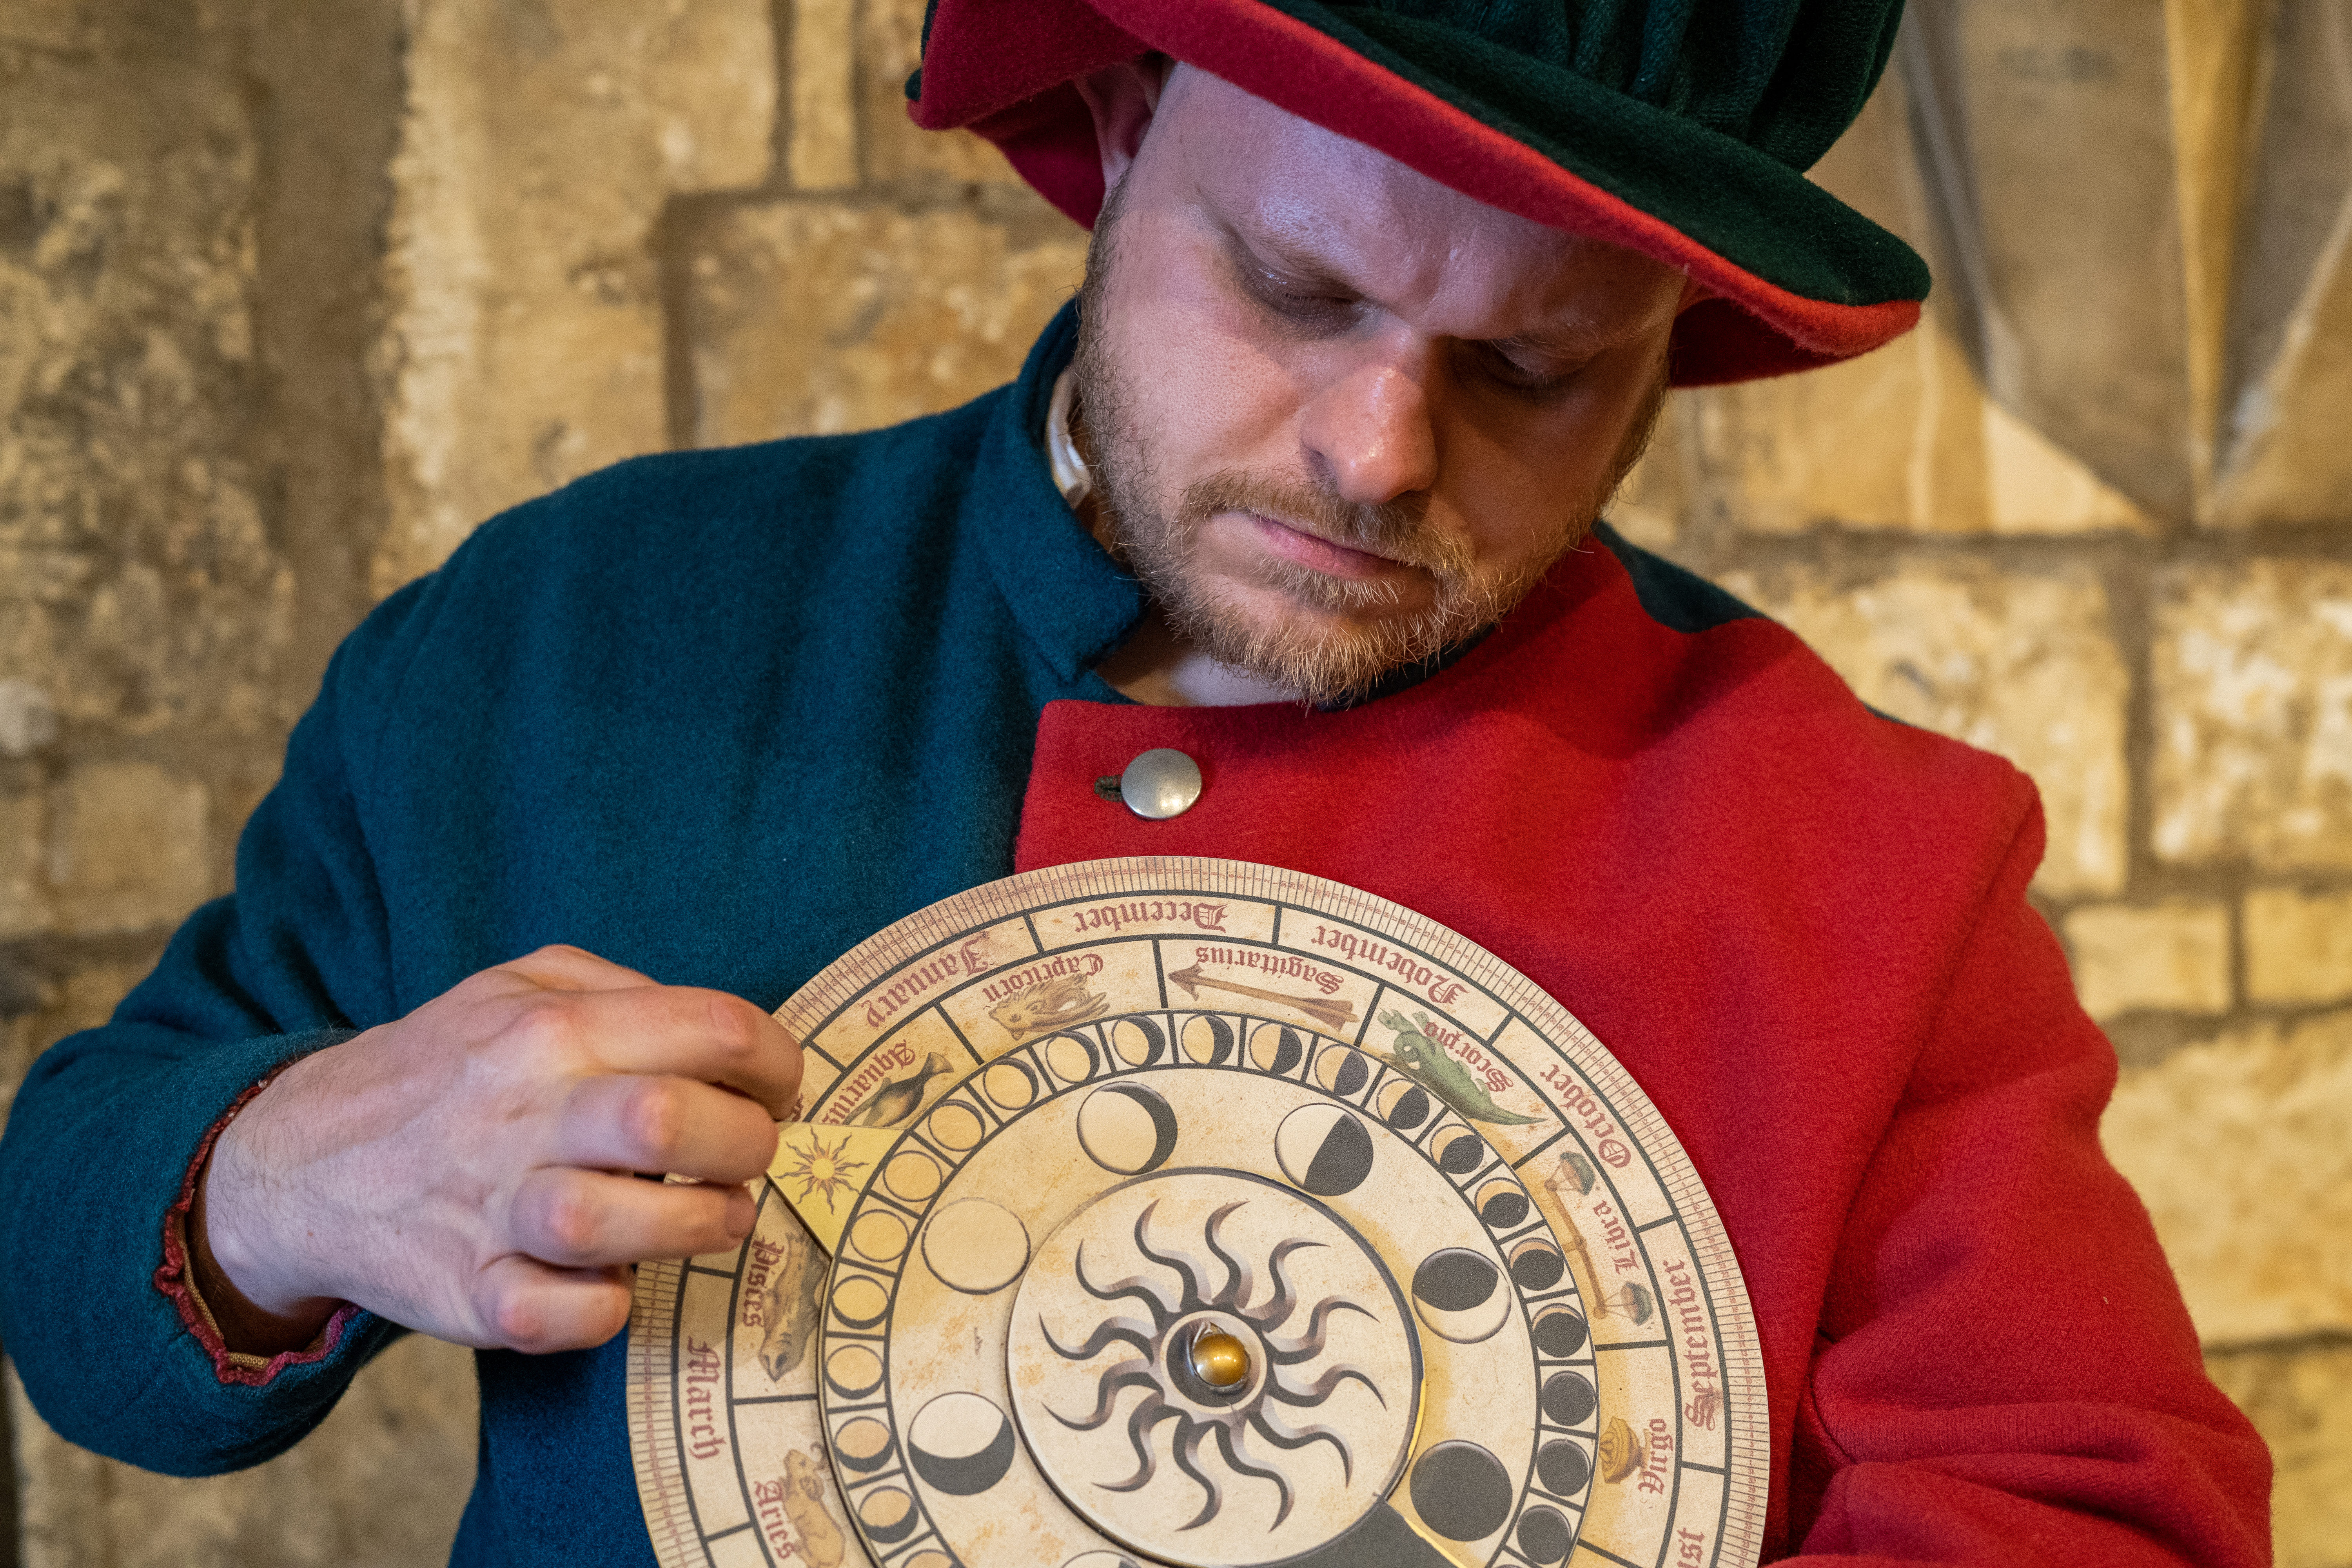 Bring history to life with JORVIK Group attractions.